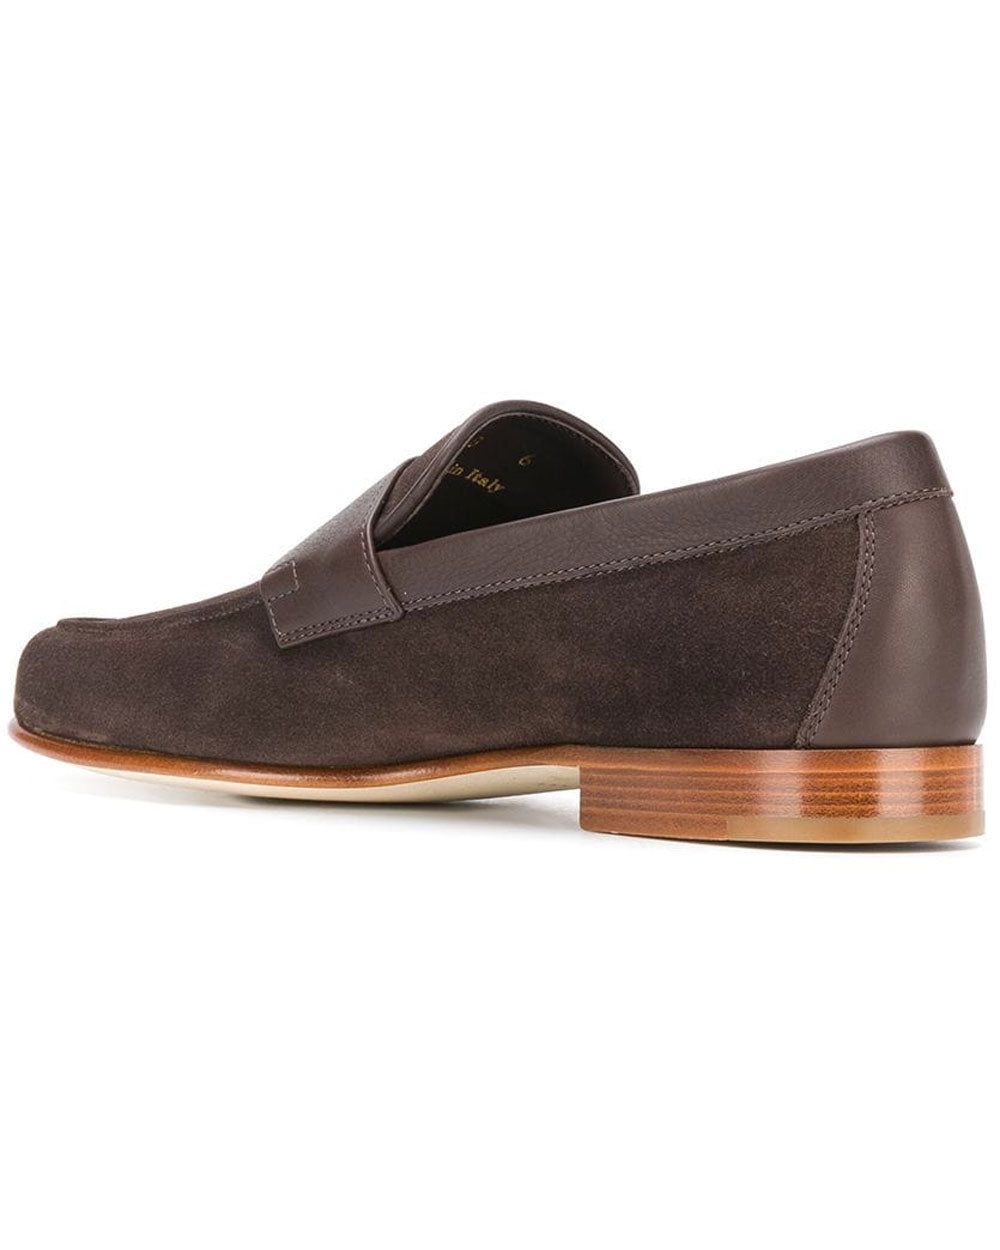 Hendra Loafer in Brown